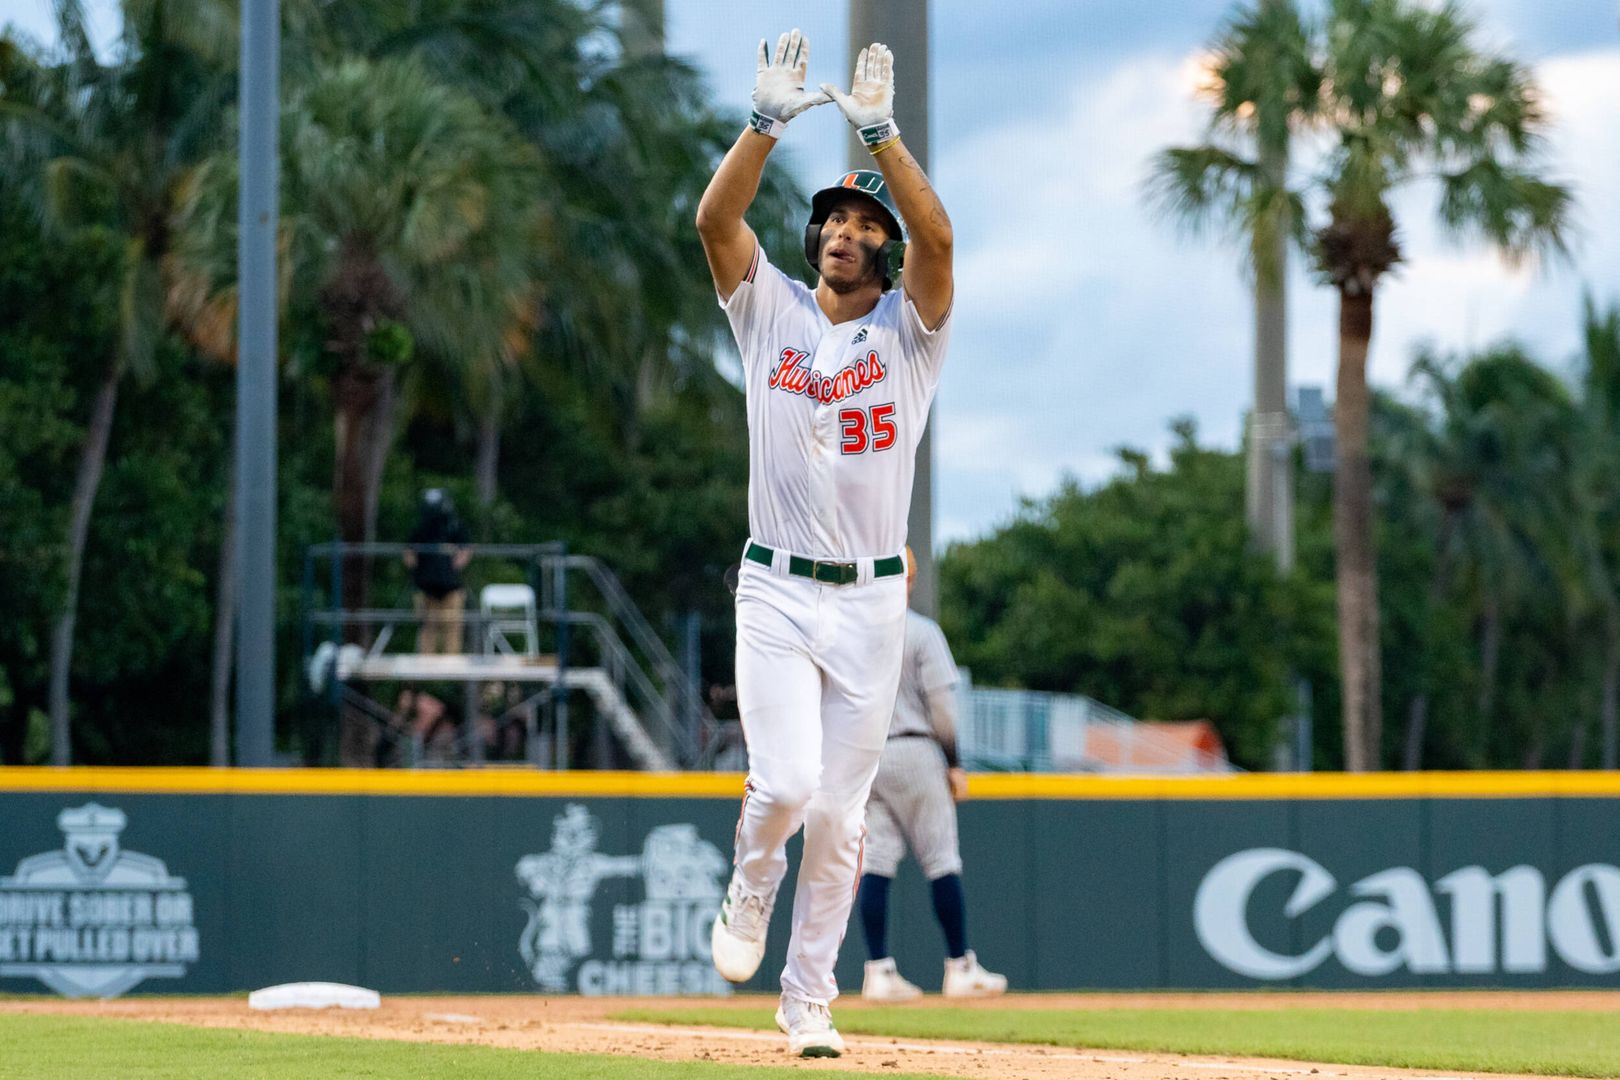 Morales’ Historic Night Leads Hurricanes to Victory in Coral Gables Regional Opener